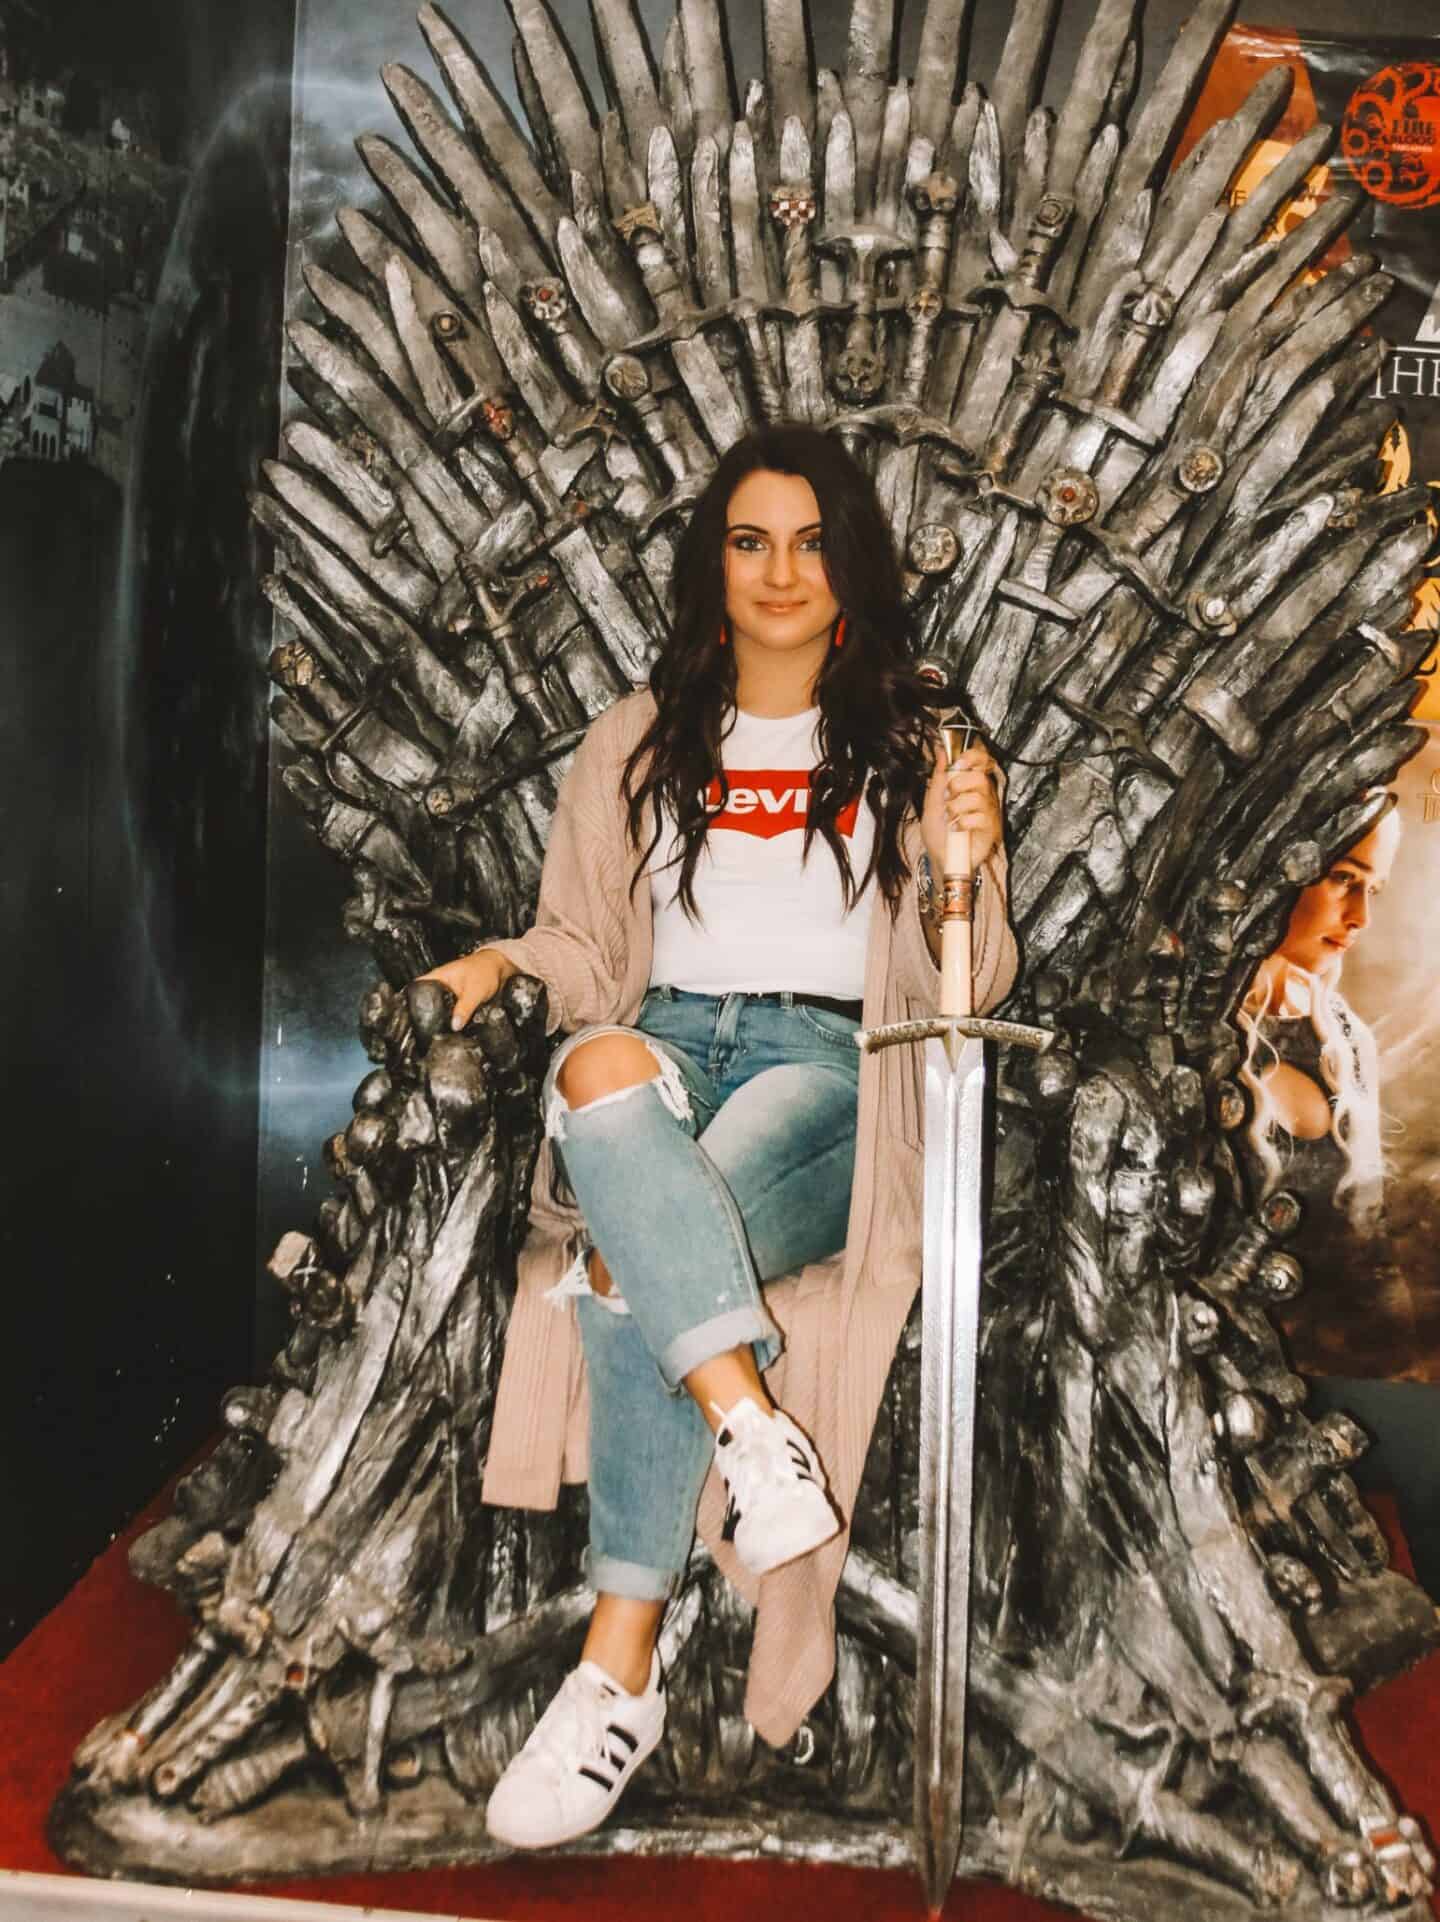 Madison sitting on the Iron Throne after the Game of Thrones Tour in Dubrovnik